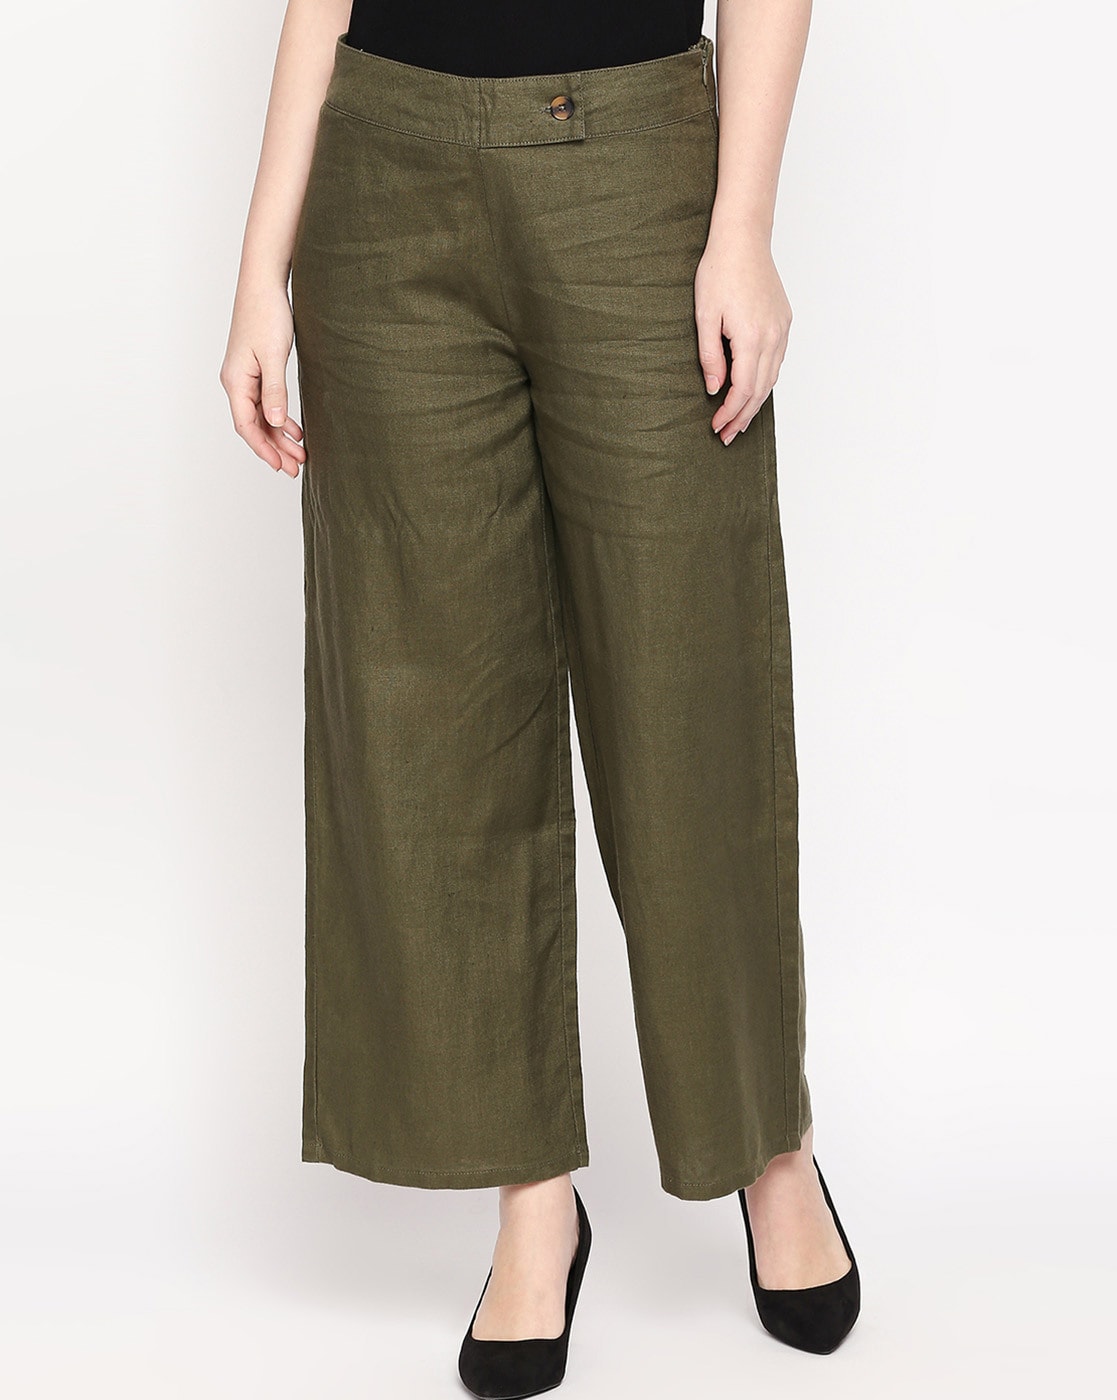 Buy Olive Green Trousers  Pants for Women by Annabelle by Pantaloons Online   Ajiocom